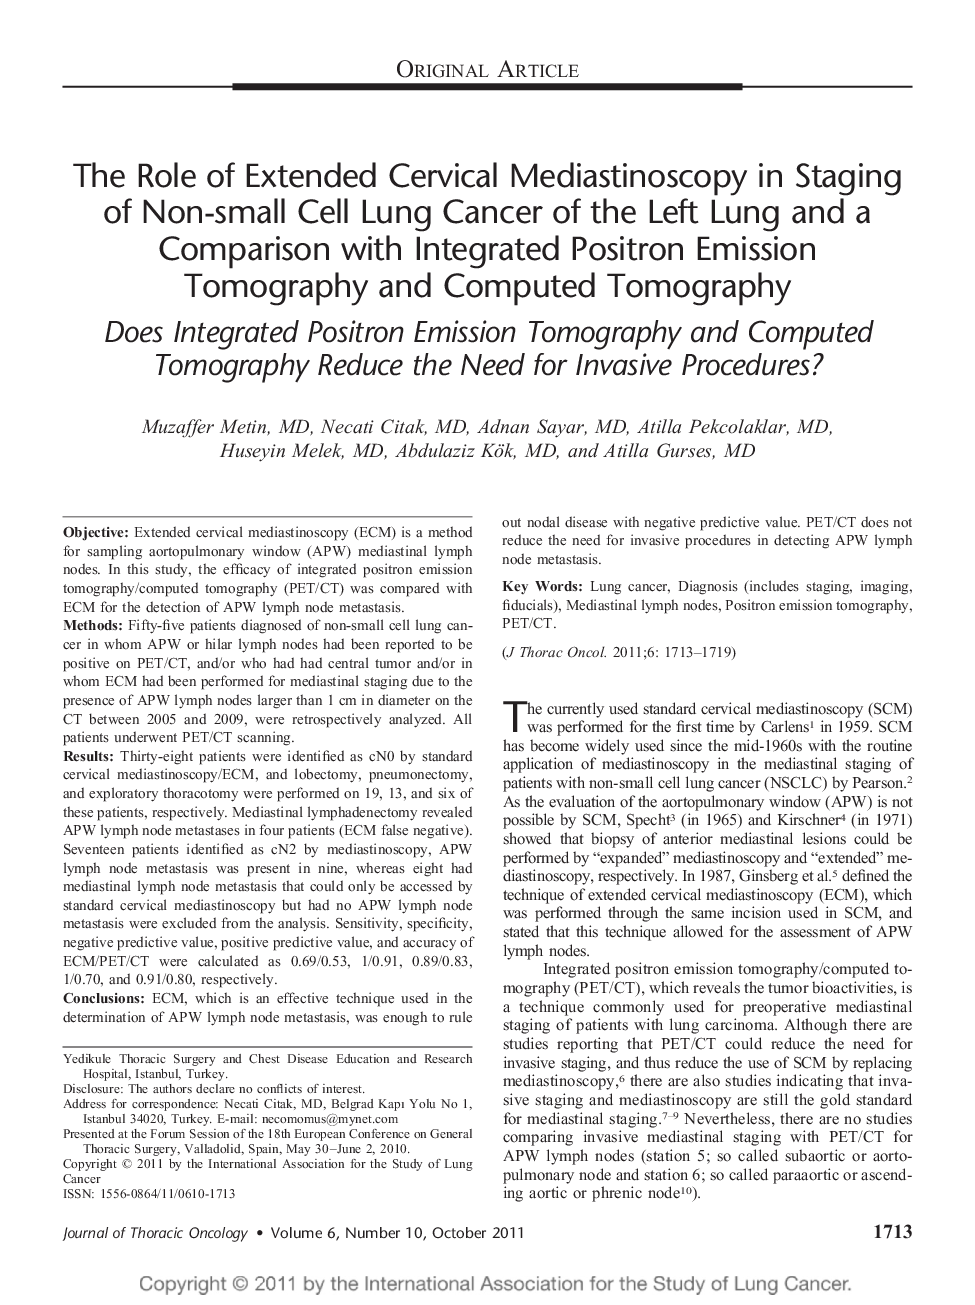 The Role of Extended Cervical Mediastinoscopy in Staging of Non-small Cell Lung Cancer of the Left Lung and a Comparison with Integrated Positron Emission Tomography and Computed Tomography: Does Integrated Positron Emission Tomography and Computed Tomogr